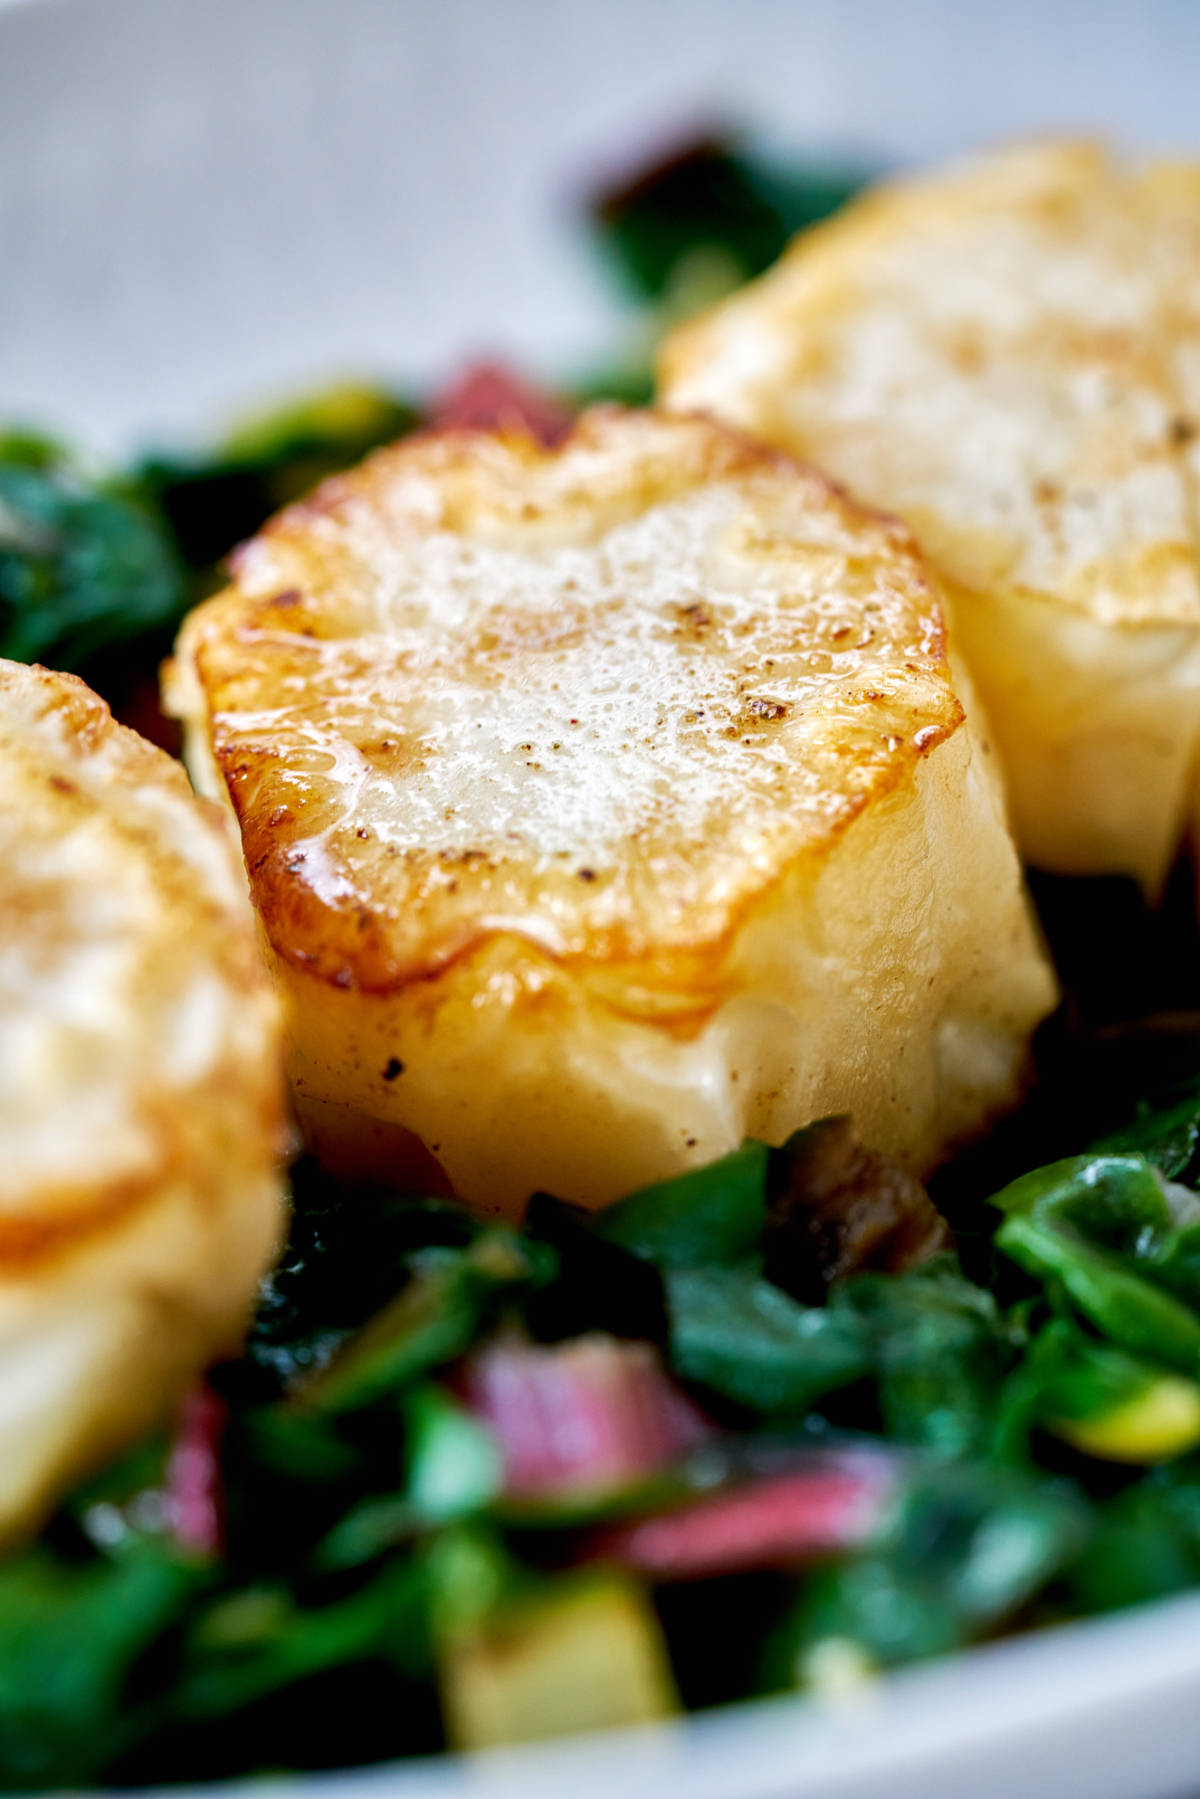 Vegan scallops on a bed of greens.